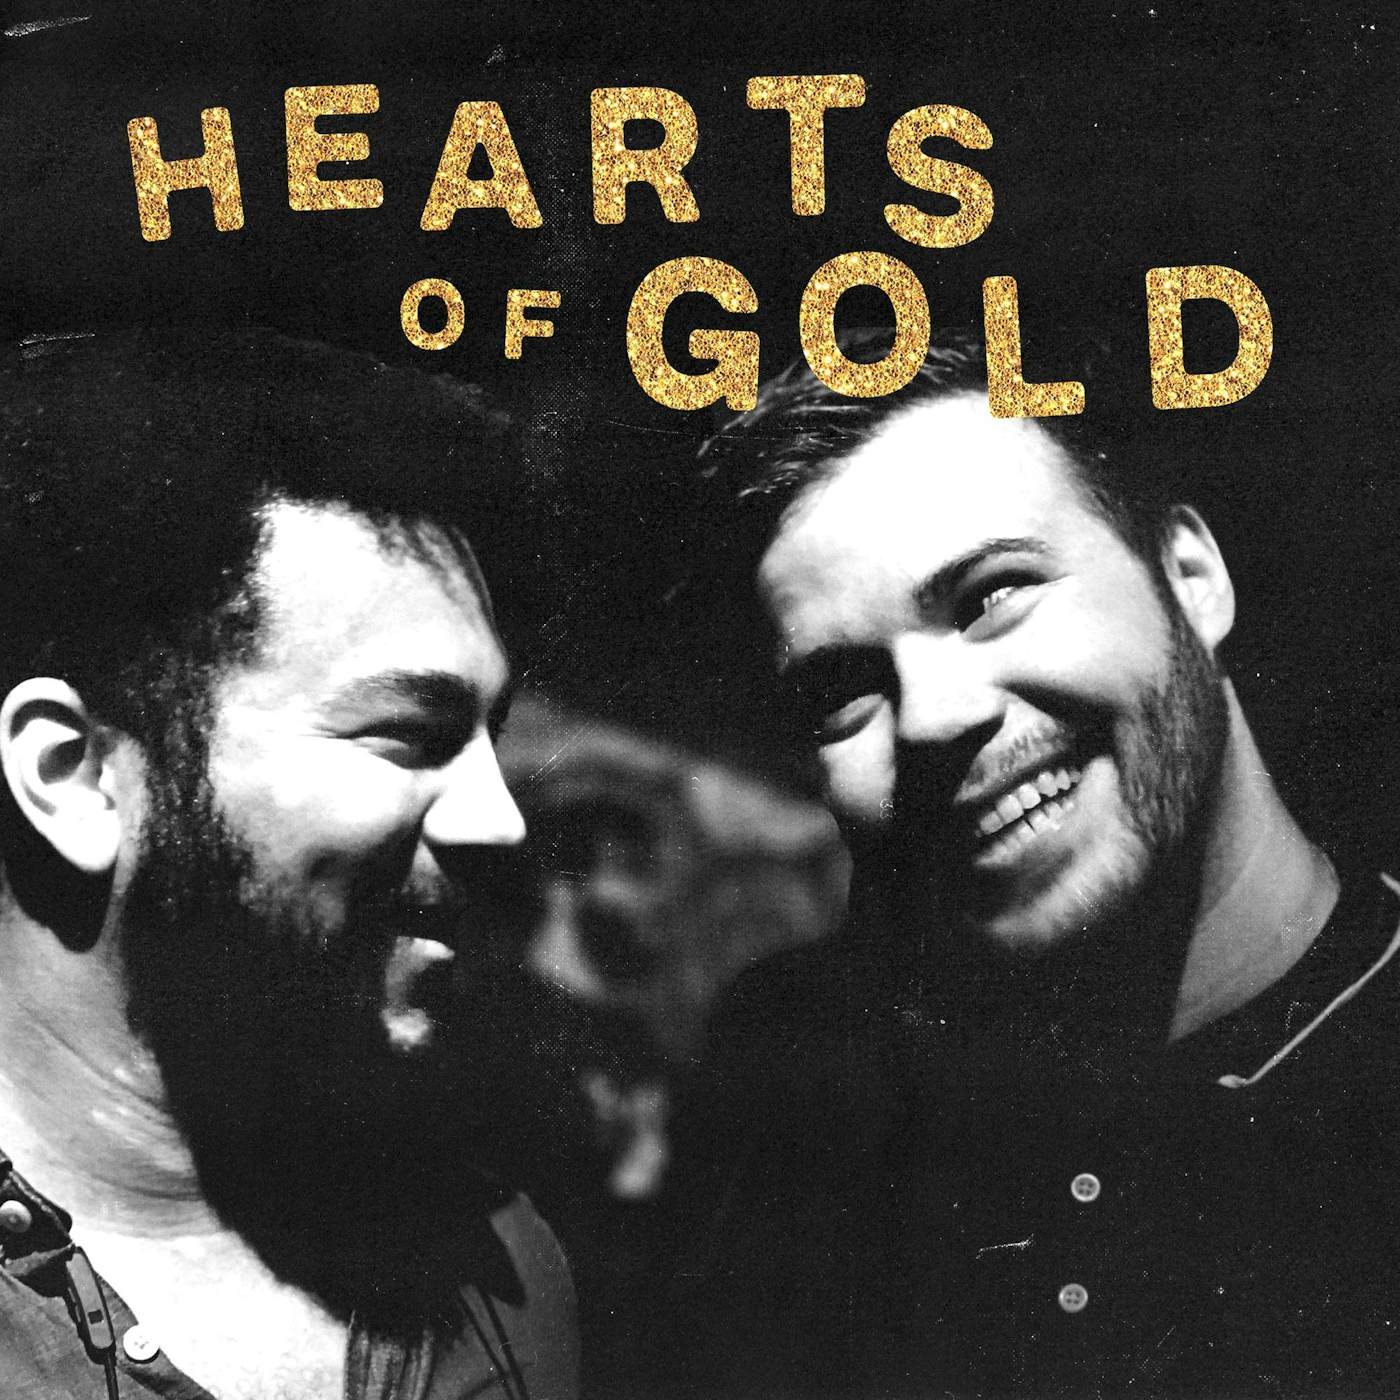 Dollar Signs Hearts Of Gold CD